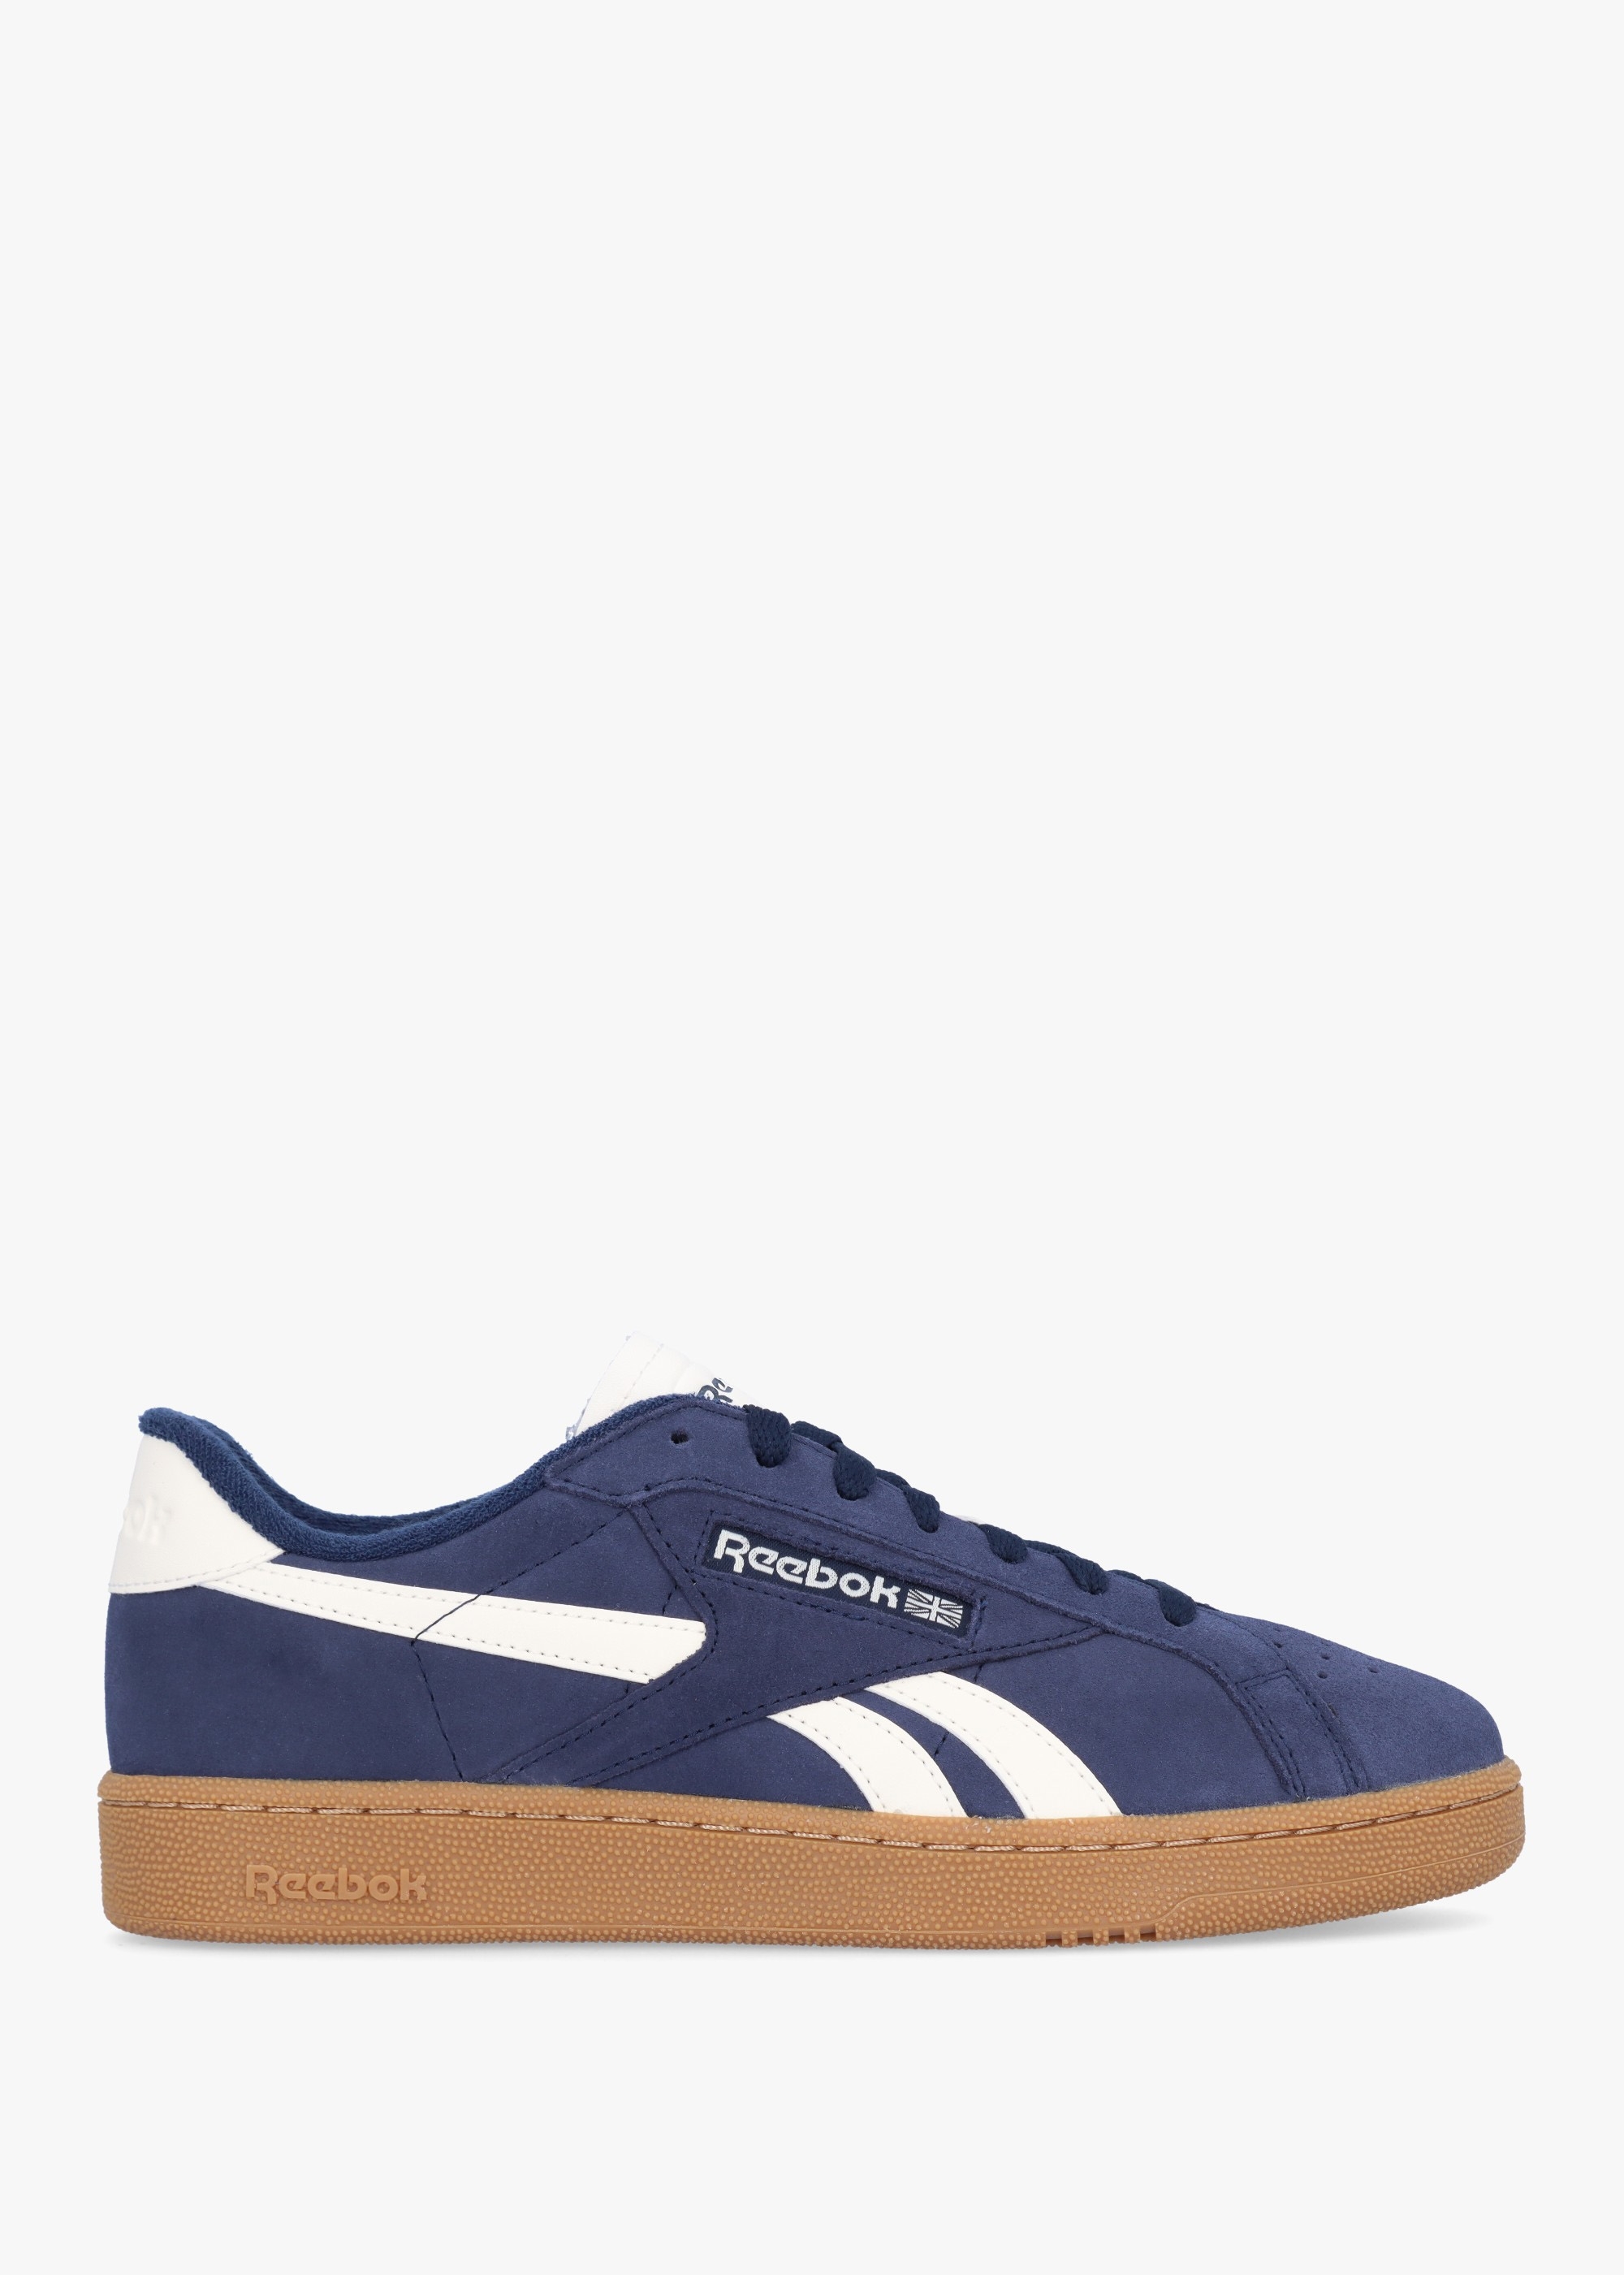 Reebok  Mens Club C Grounds Uk Trainers In Vector Navy/Chalk